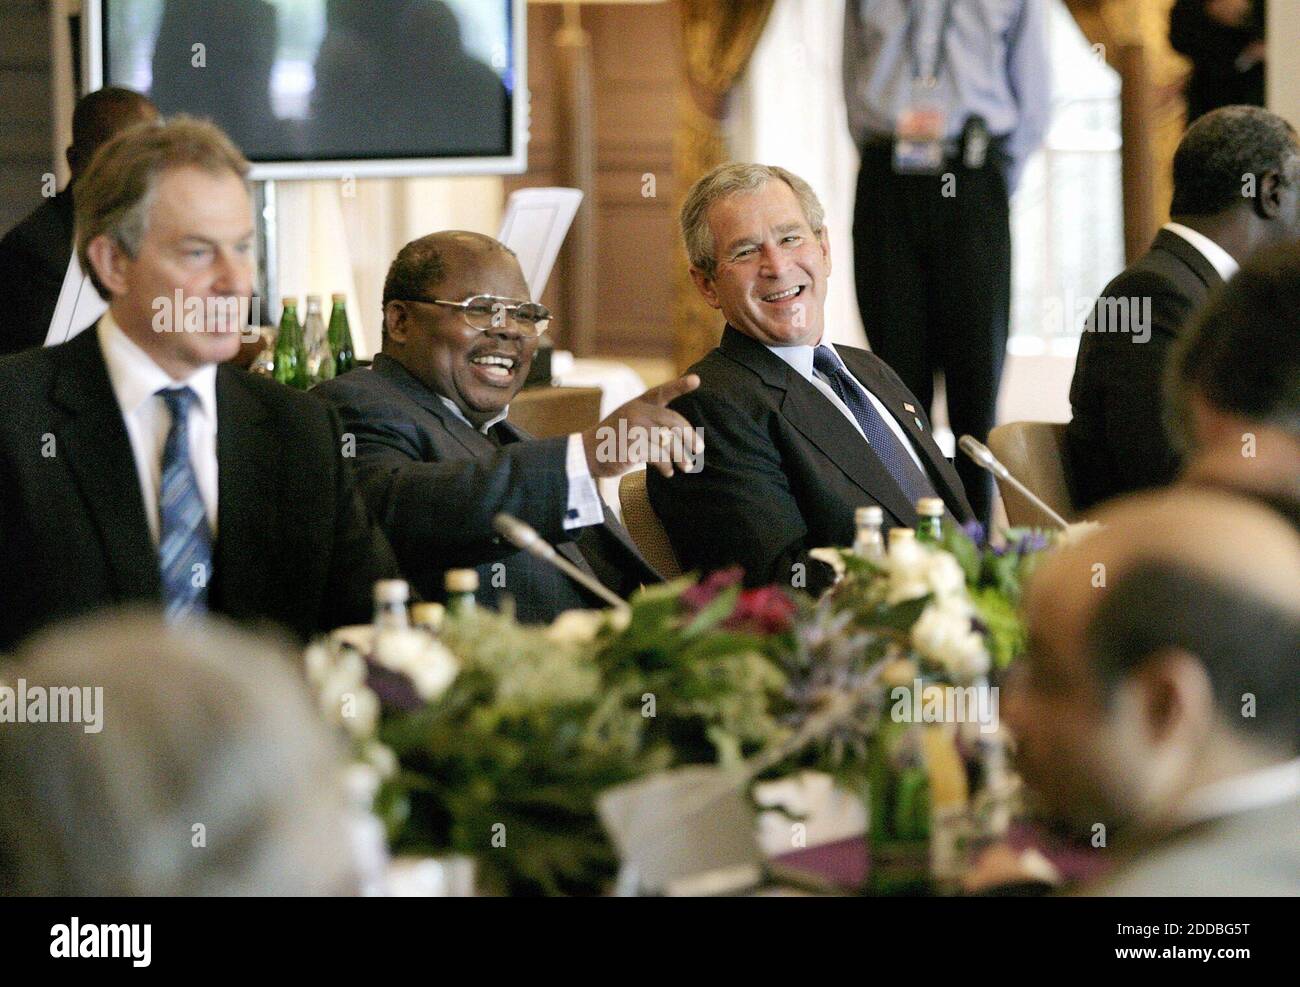 NO FILM, NO VIDEO, NO TV, NO DOCUMENTARY - U.S. President George W. Bush shares a light moment with Tanzanian President Benjamin Mkapa during the morning session of the G8 Summit at Gleneagles Hotel in Auchterarder, near Gleneagles, Scotland, UK, on Friday, July 8, 2005. Photo by Eric Draper/The White House/KRT/ABACAPRESS.COM. Stock Photo